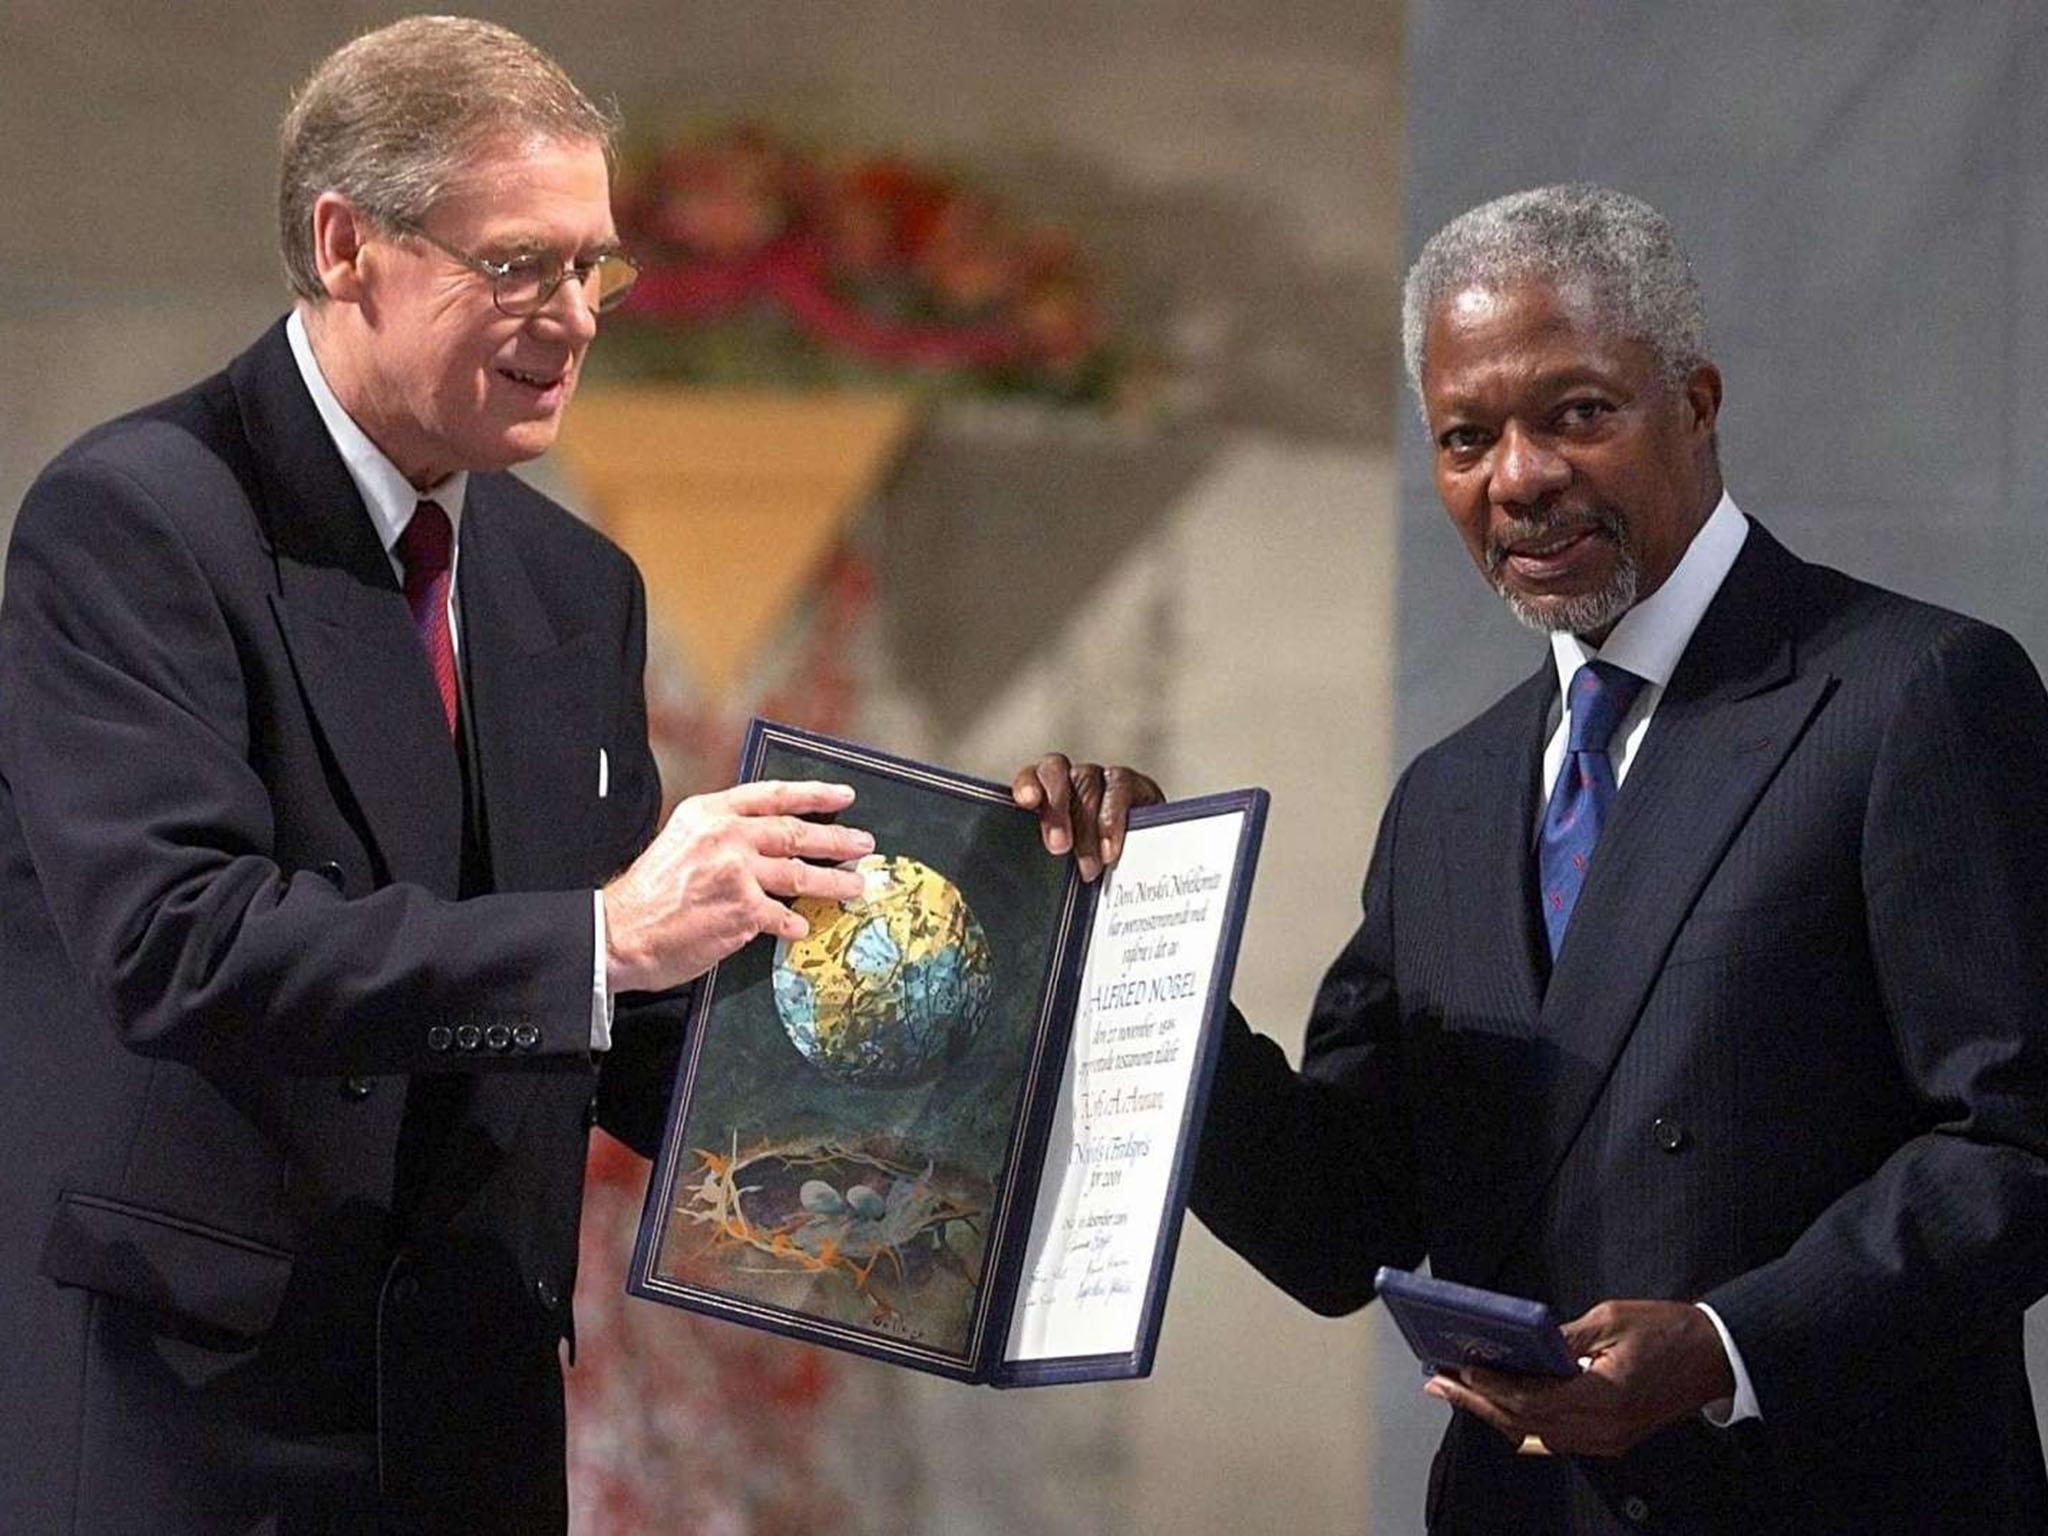 He was awarded the Nobel Peace Prize in 2001 for his efforts to revitalise the UN during the Iraq War and HIV pandemic